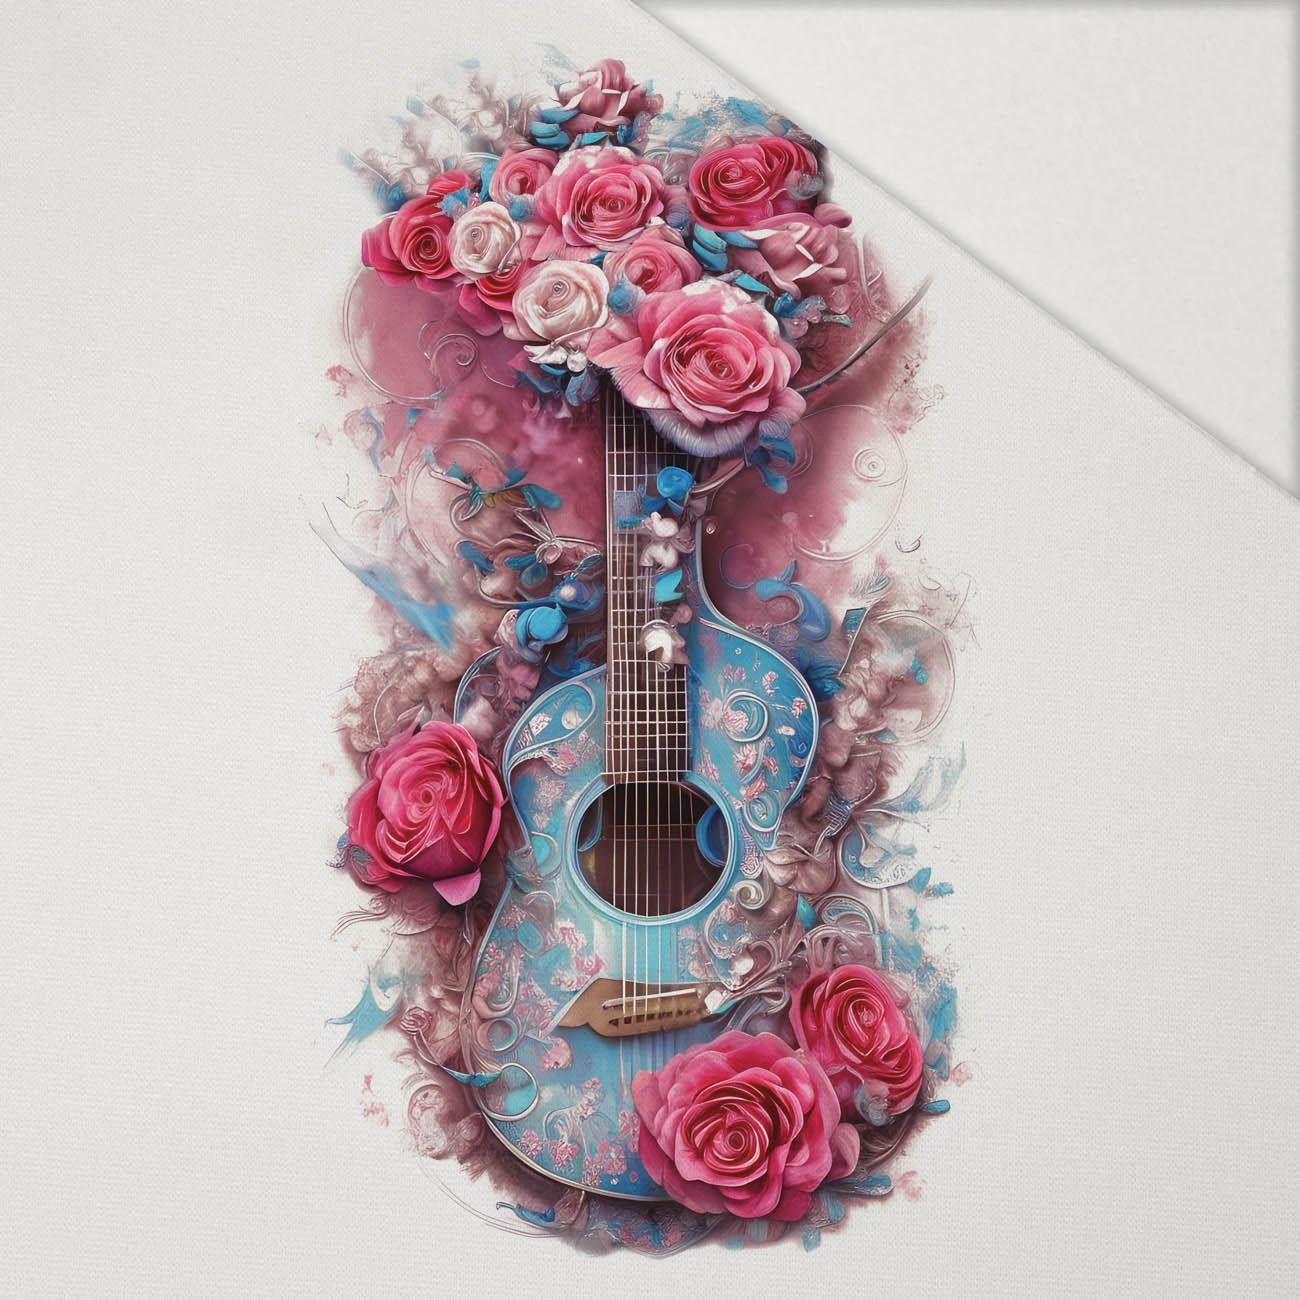 GUITAR WITH ROSES - panel (75cm x 80cm) Hydrophobic brushed knit